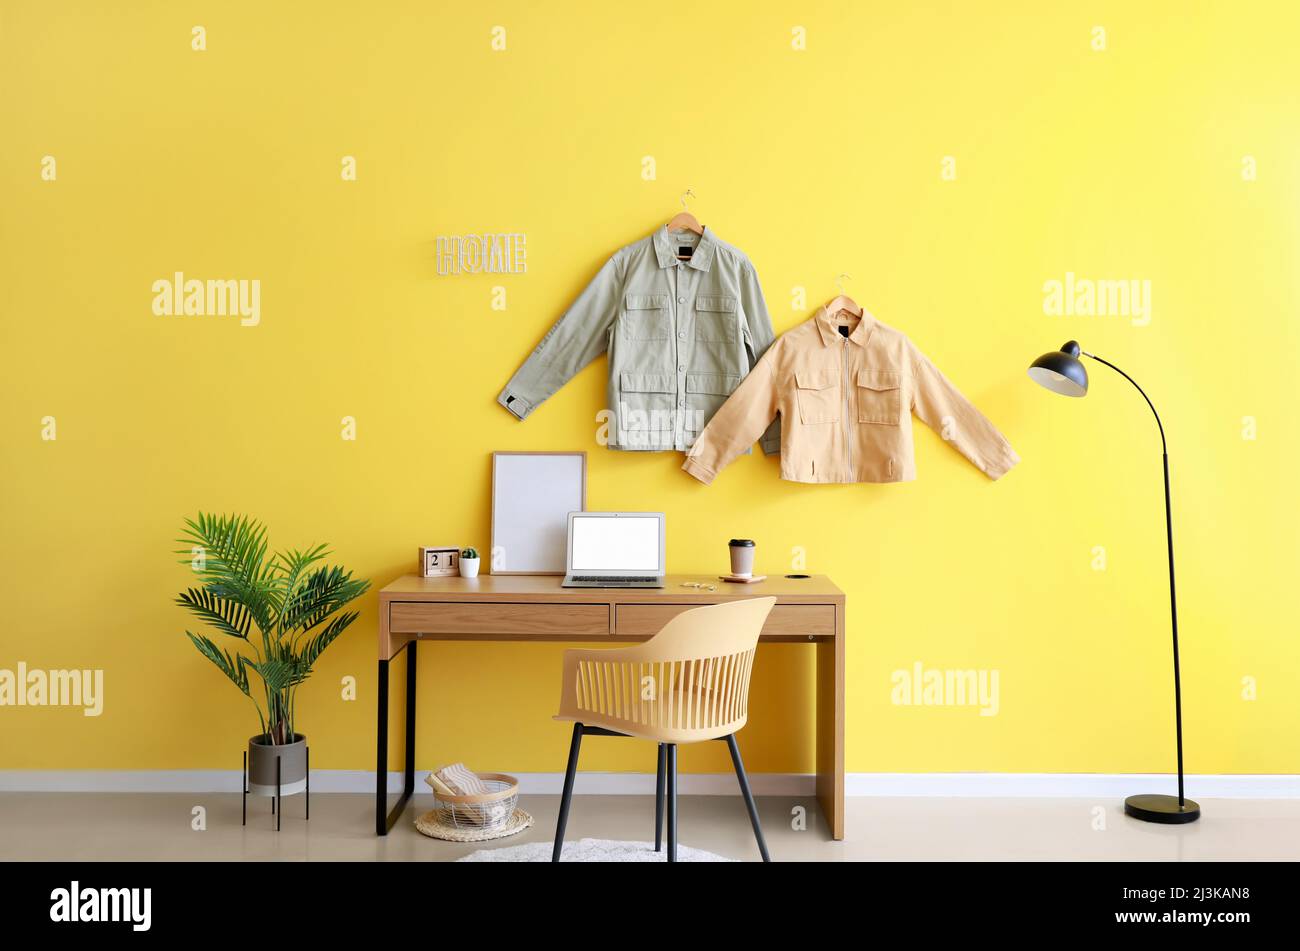 Interior of stylish room with modern workplace and stylish jackets hanging on color wall Stock Photo